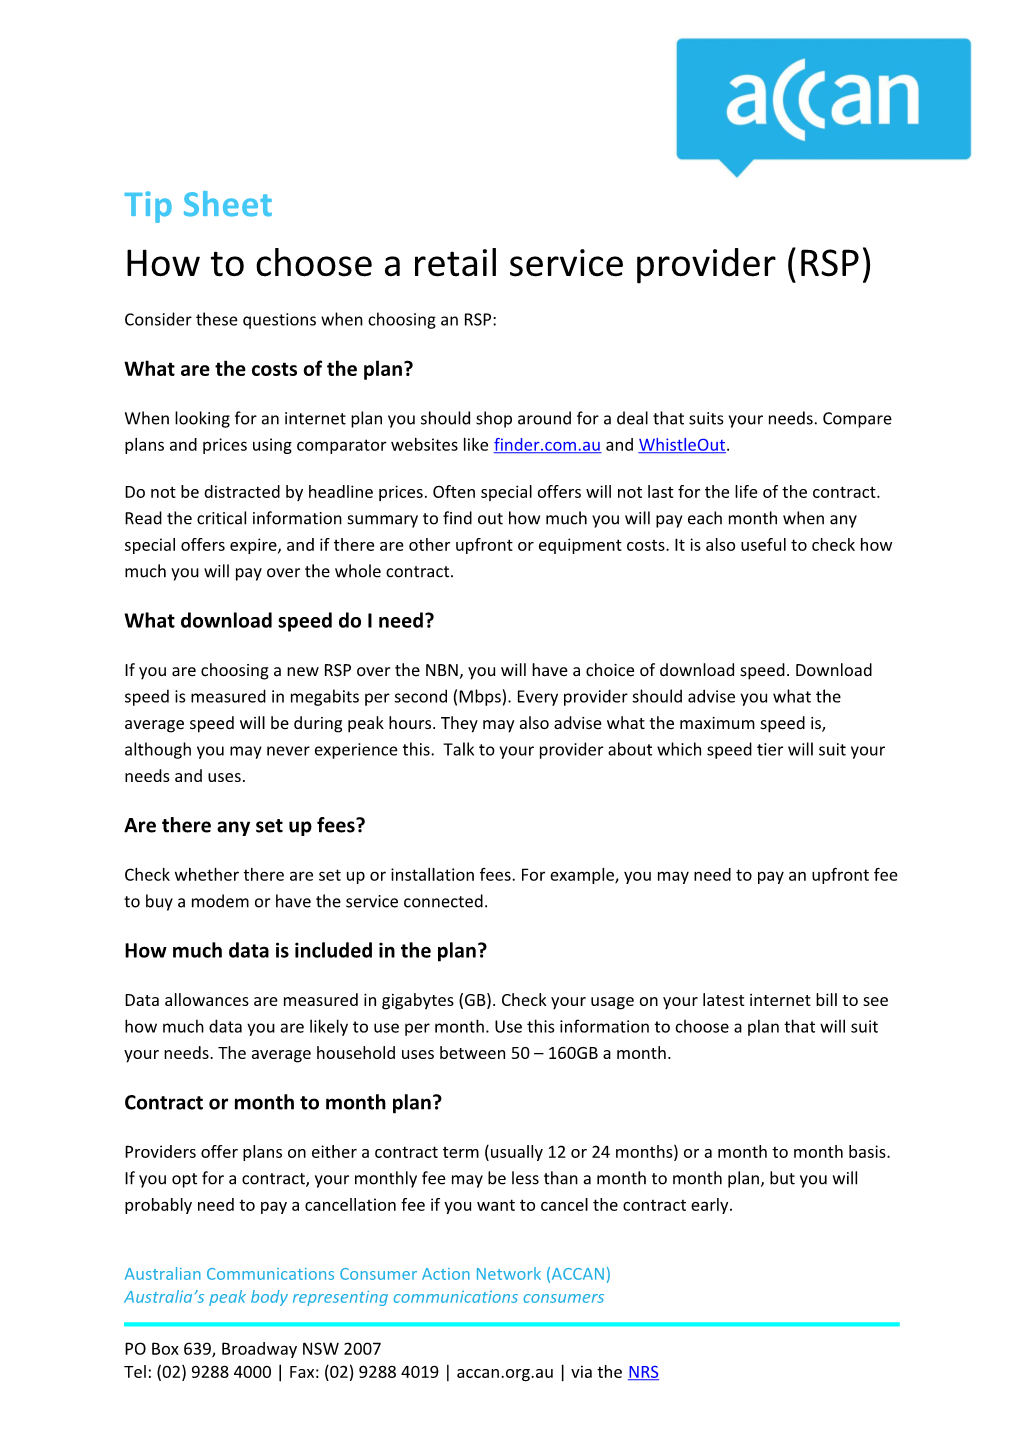 How to Choose a Retailservice Provider (RSP)